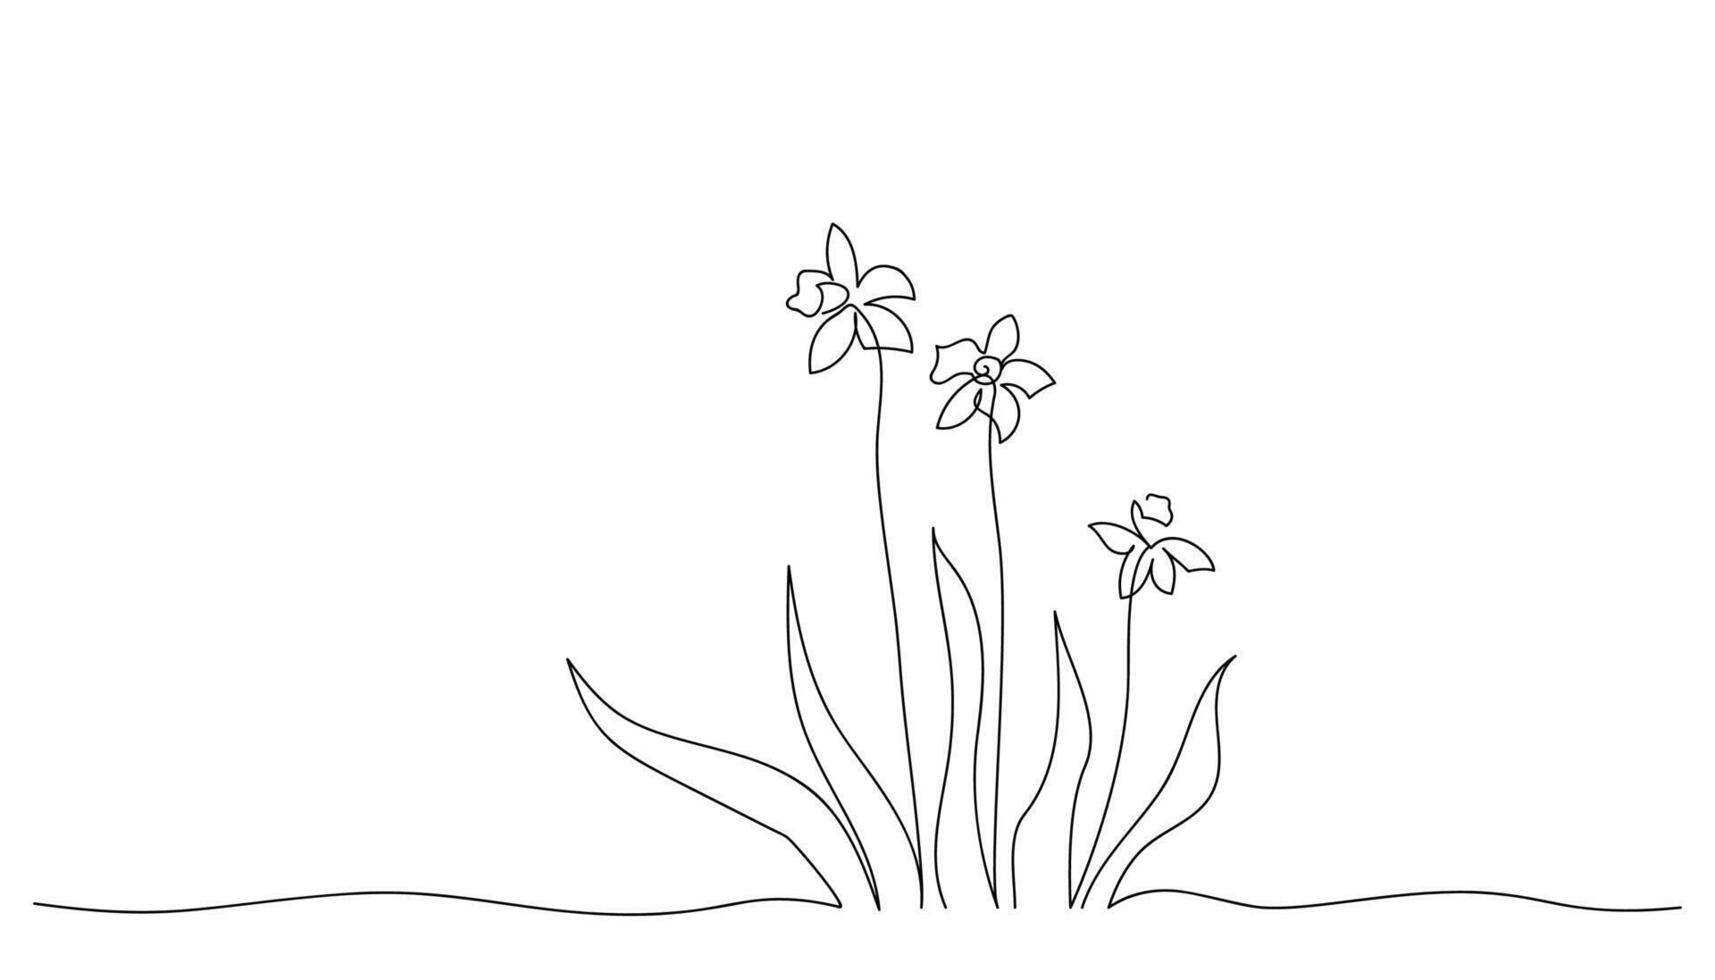 Continuous line drawing of daffodils, Sketch of spring flowers. Botanical art in minimalist style. Beauty vector illustration in retro style.